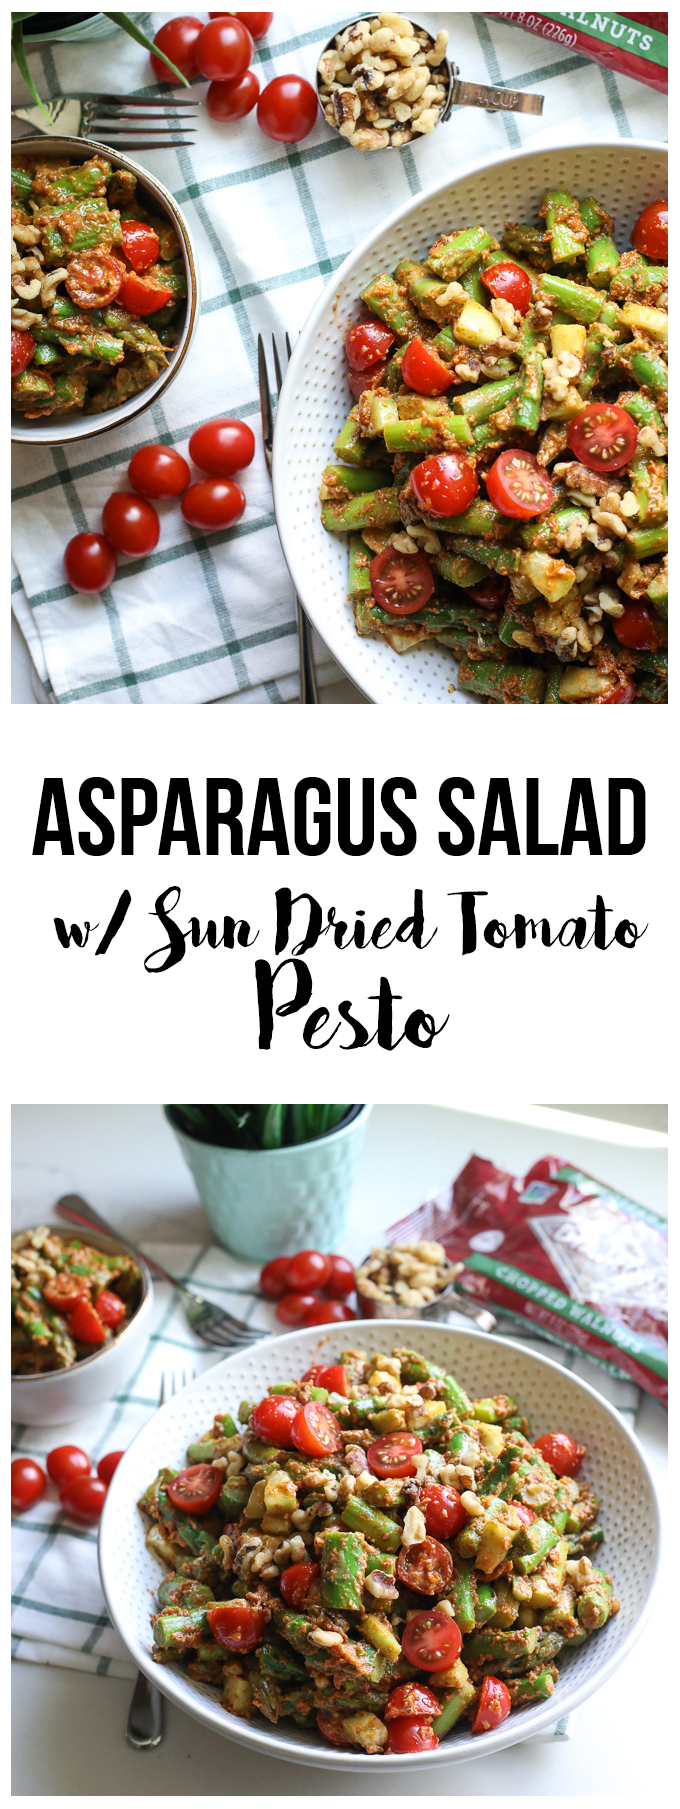 This Asparagus Salad with Sun Dried Tomato Pesto is a great spring time side dish! Paleo, super clean and packed with nutrients!